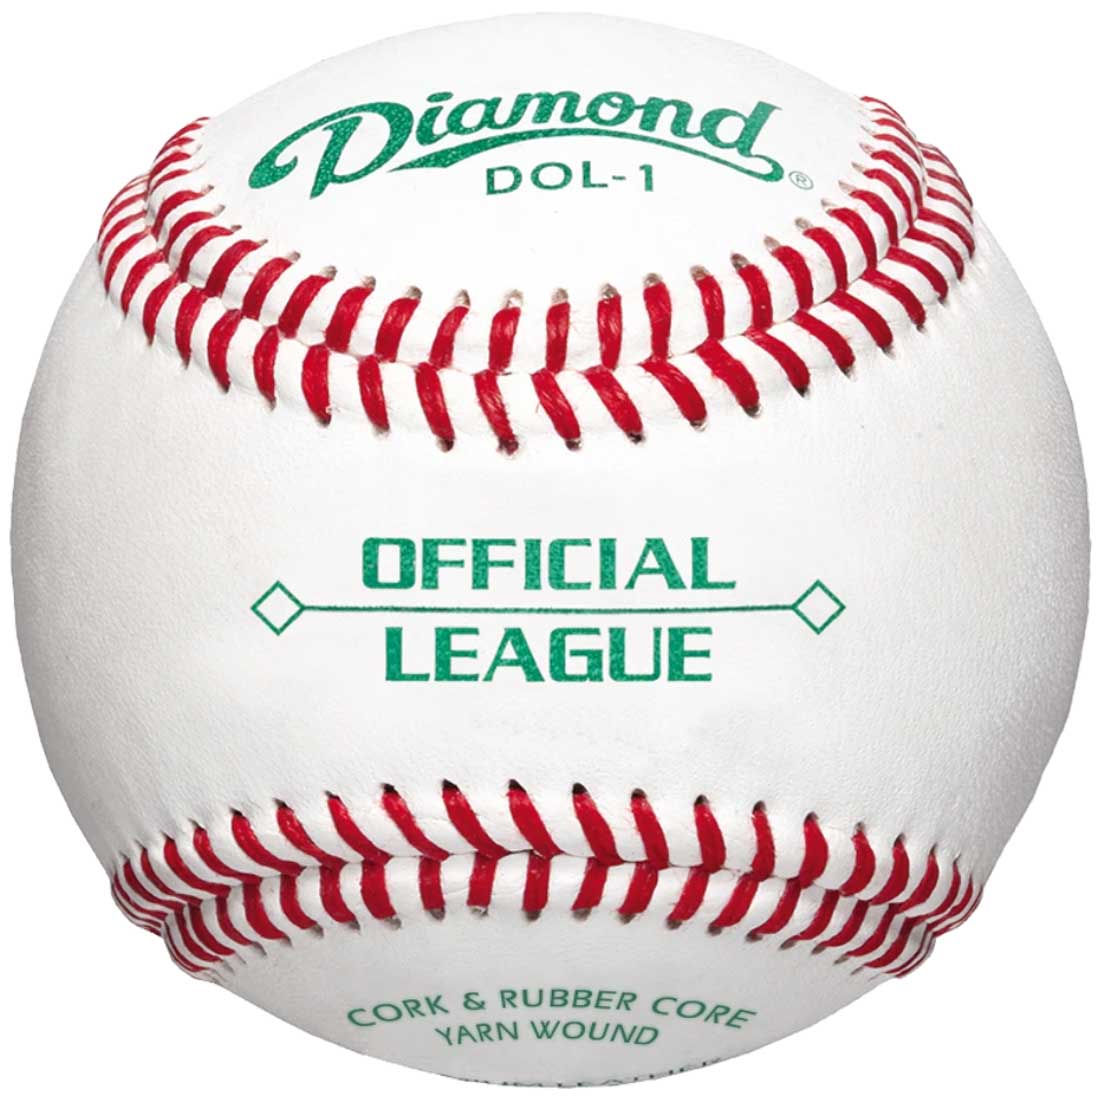 Diamond Blemished DOL-1 Official League Baseball